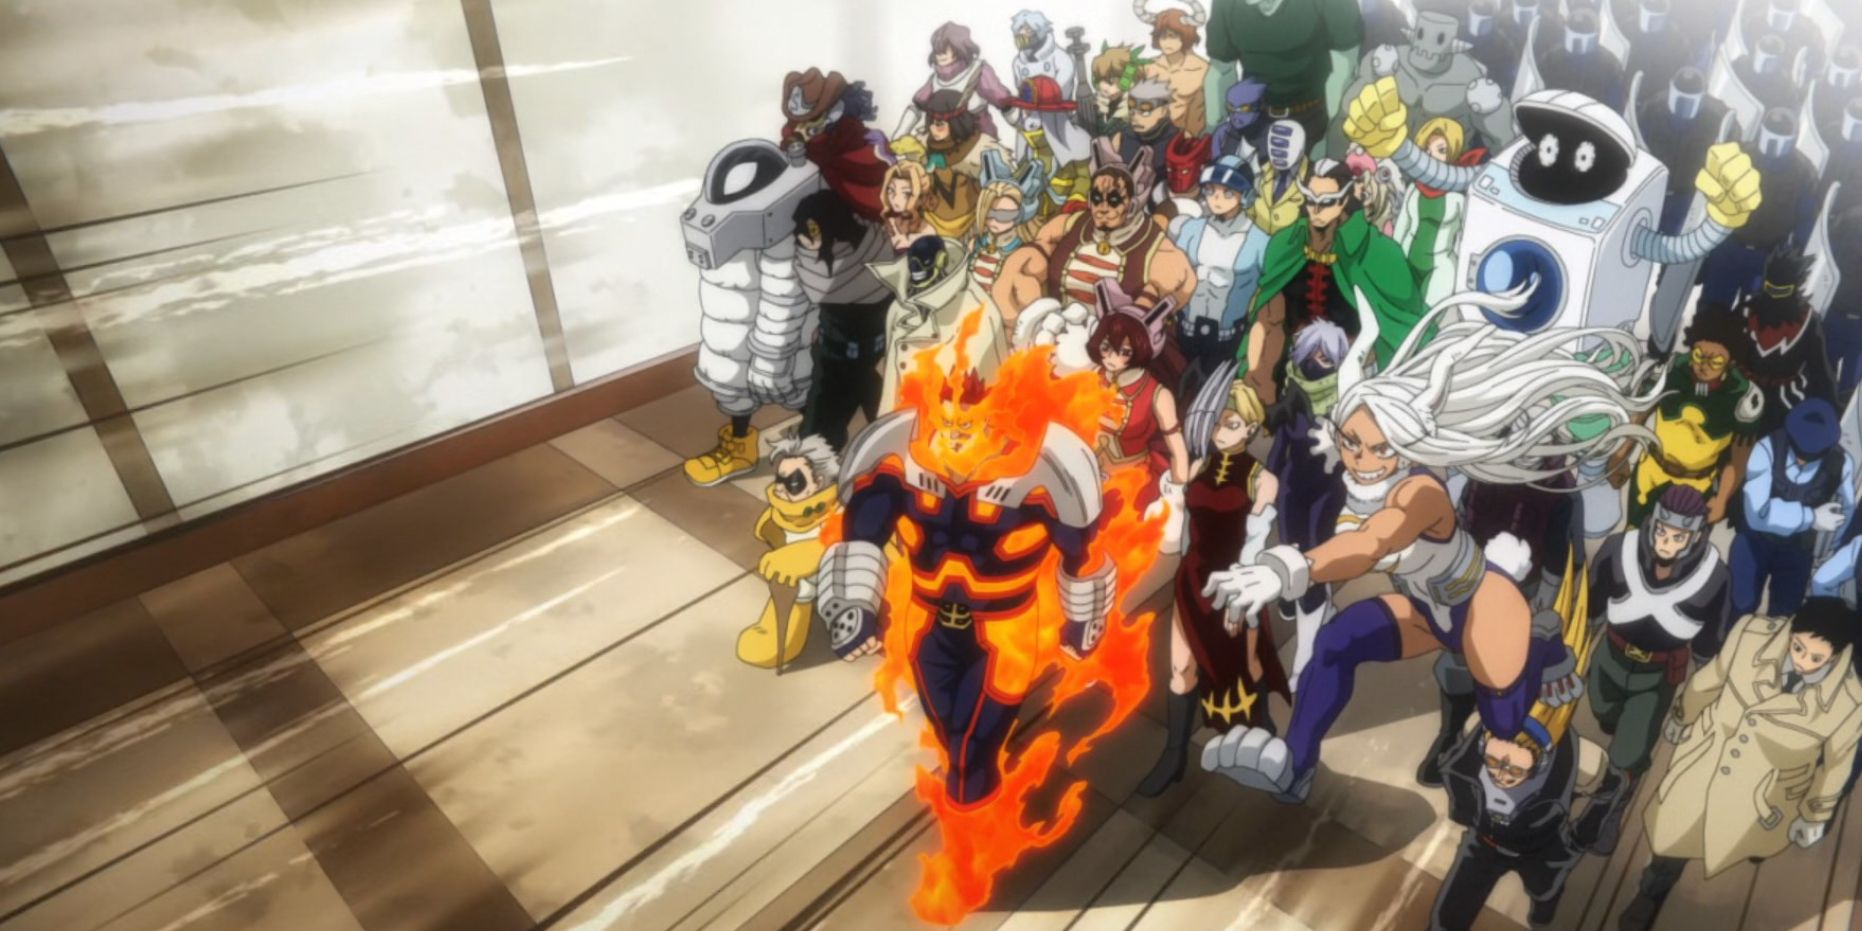 The Pro Heroes make their attack in My Hero Academia's sixth season